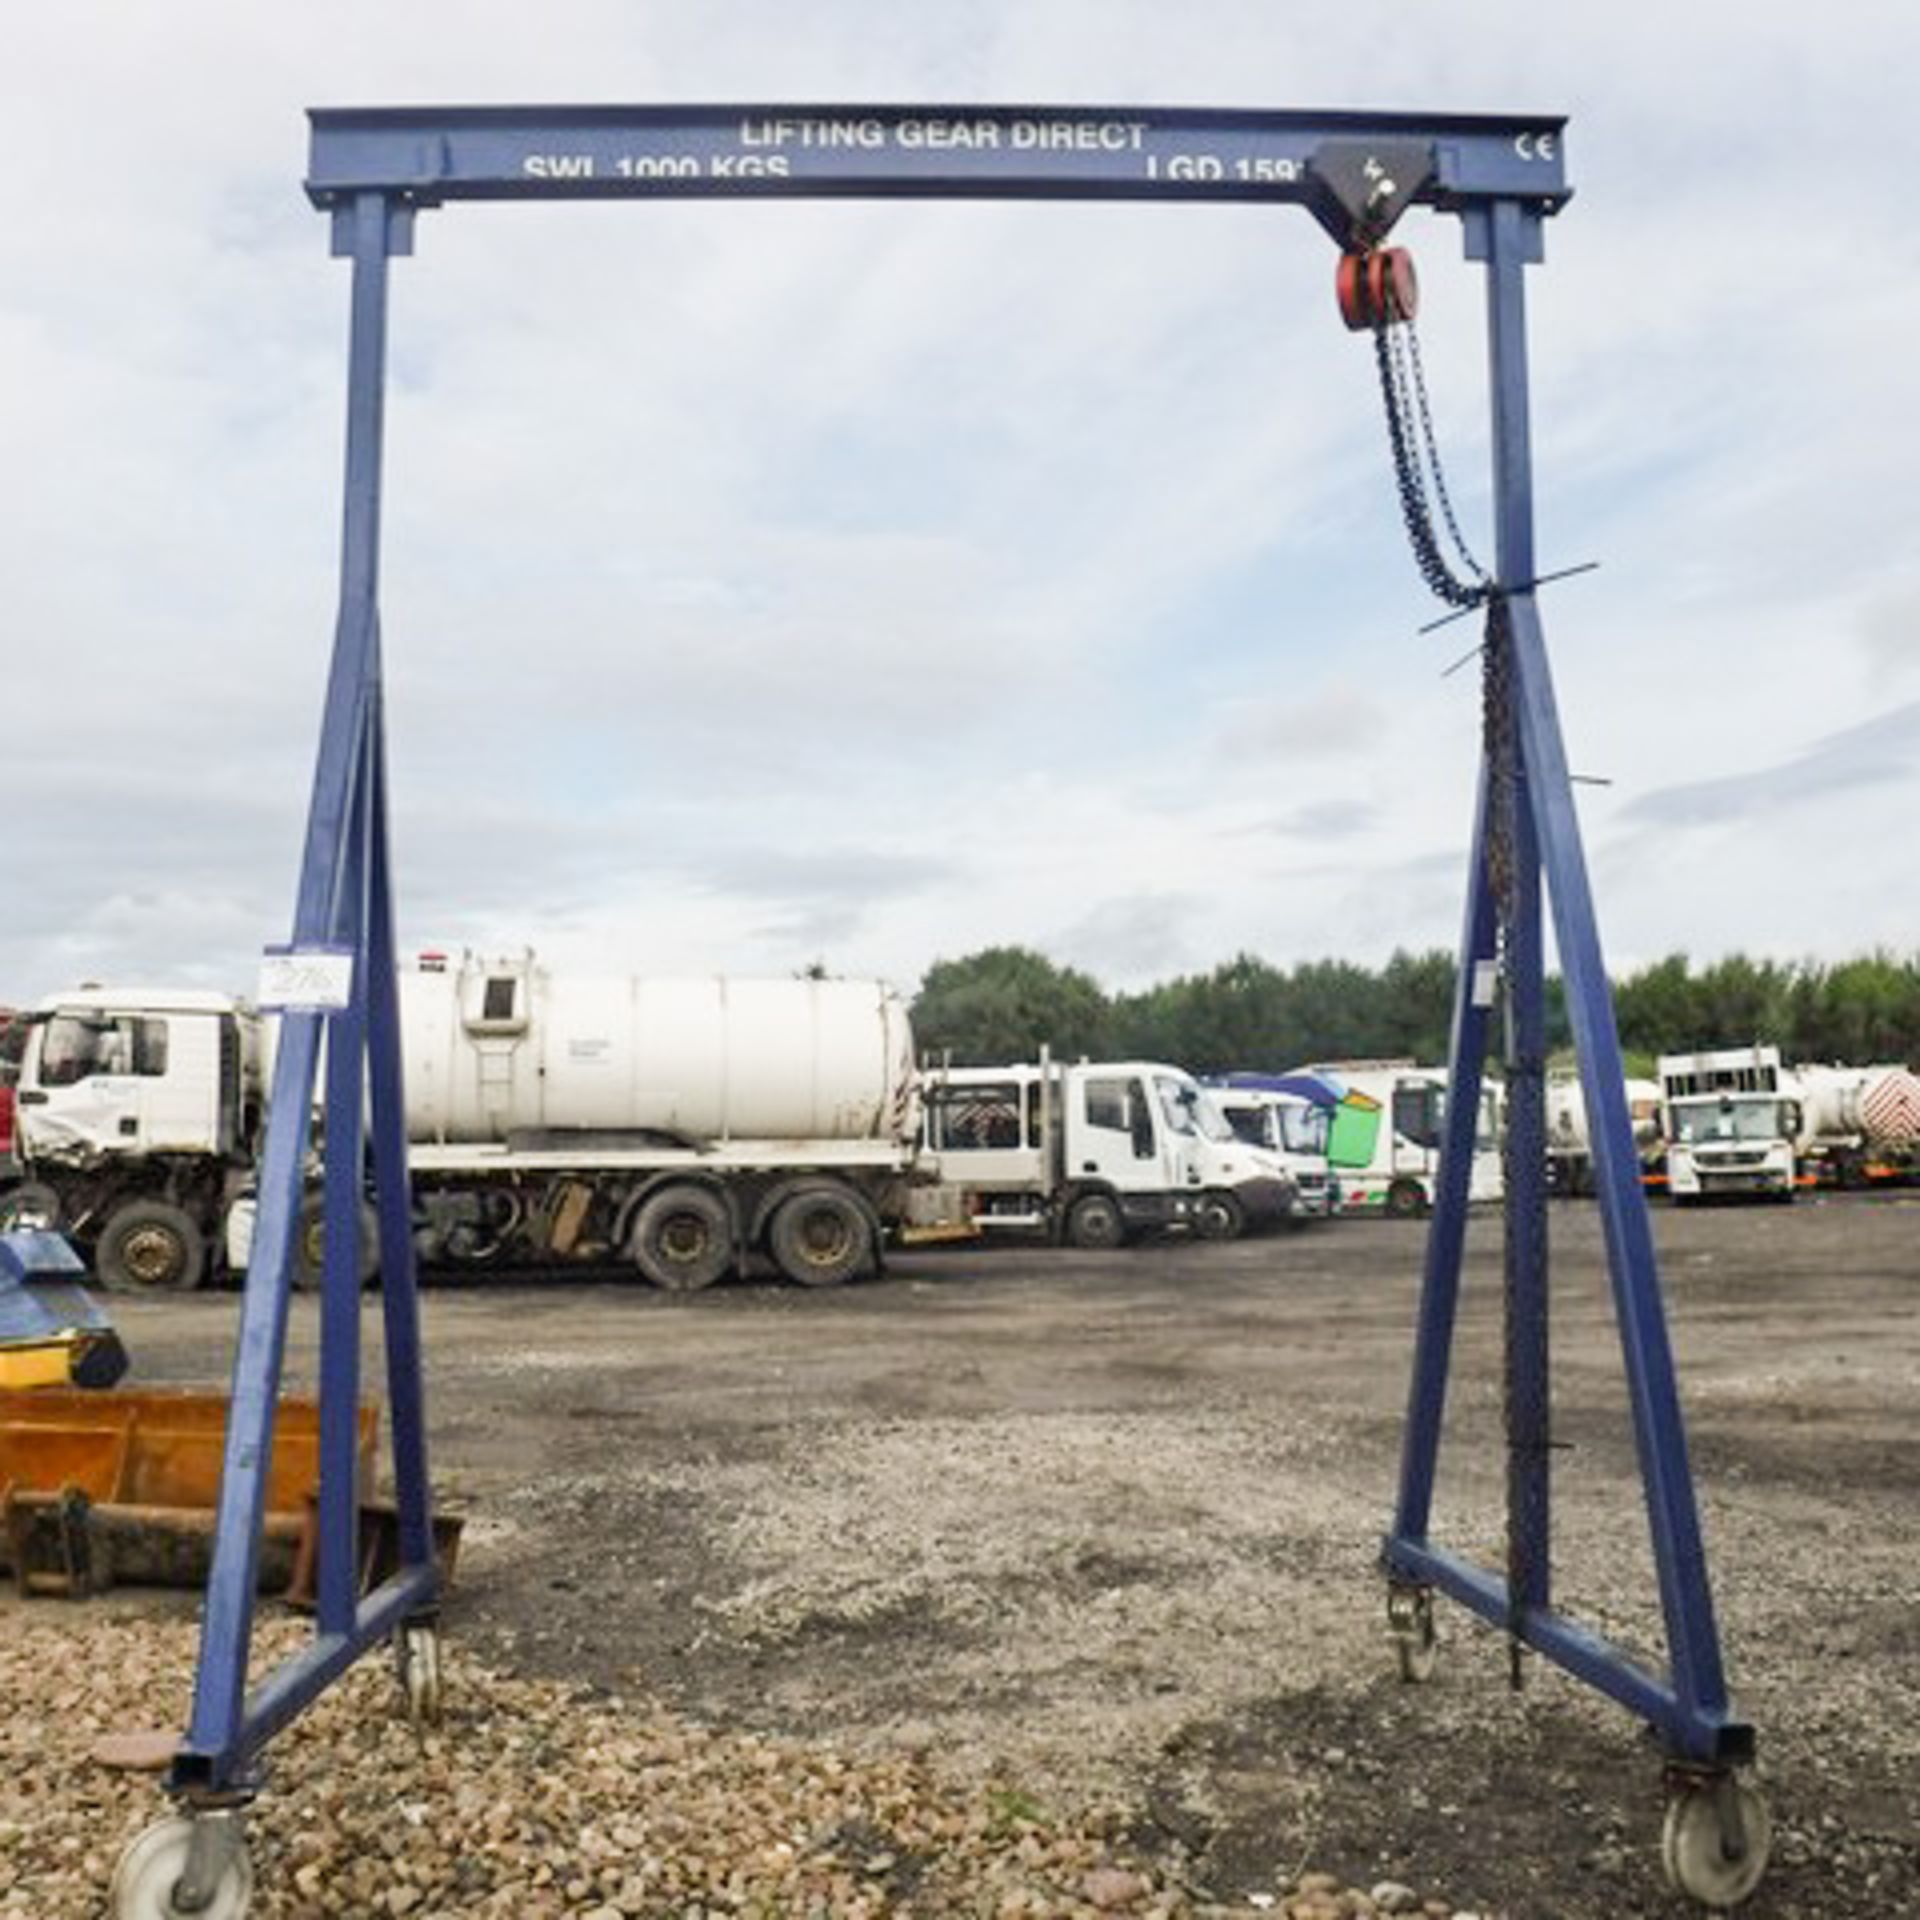 MOBILE GANTRY SYSTEM, LIFTING GEAR DIRECT, LGD15919, 1000KGS